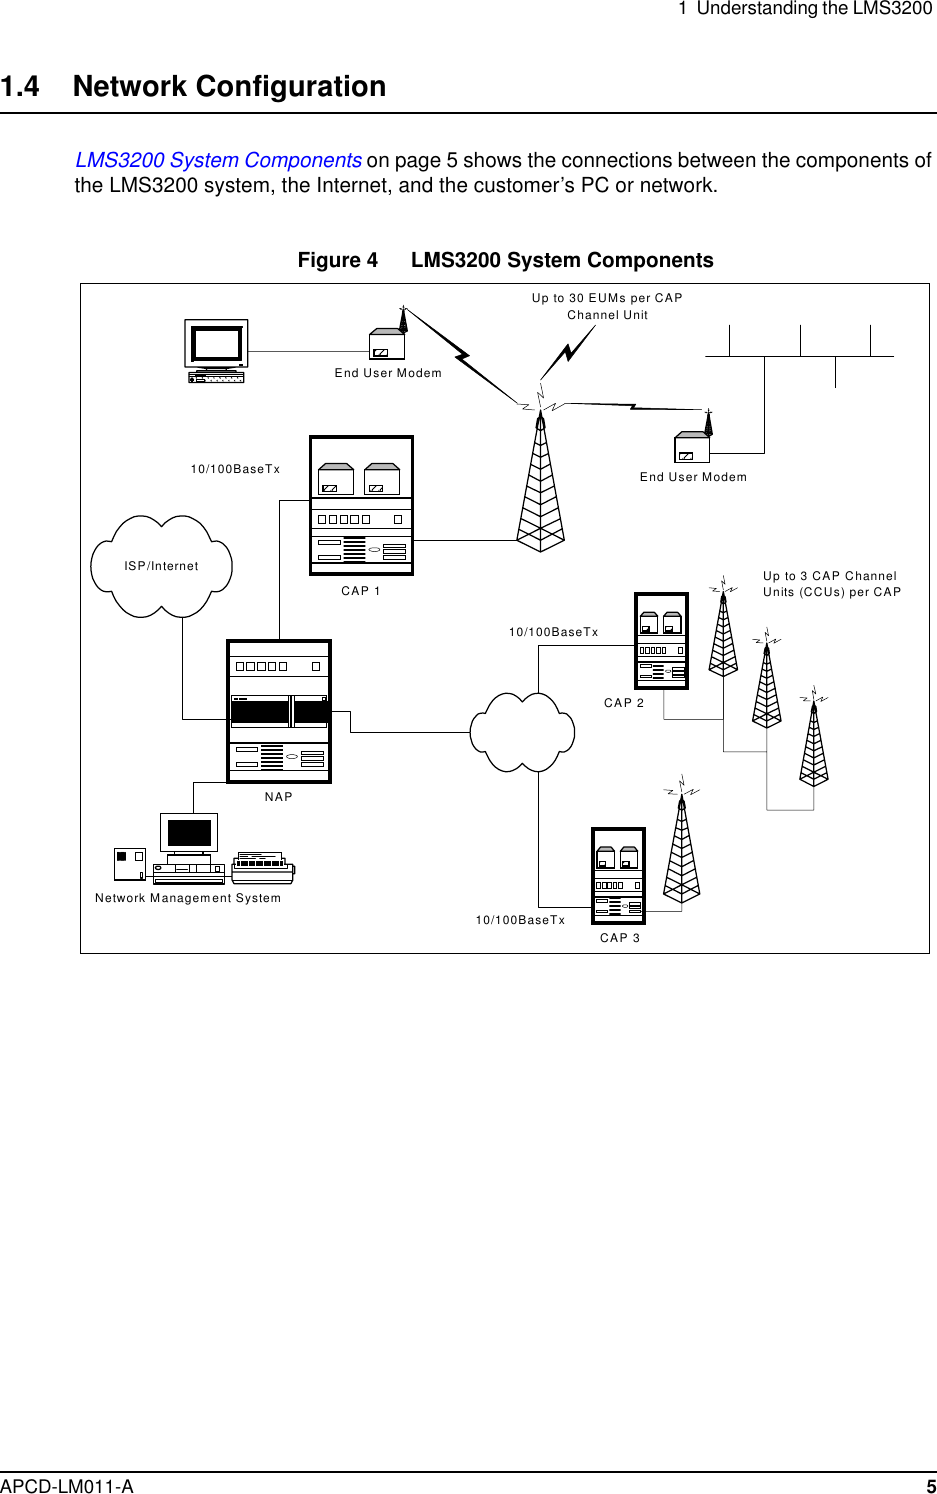 1  Understanding the LMS3200 APCD-LM011-A 51.4    Network ConfigurationLMS3200 System Components on page 5 shows the connections between the components of the LMS3200 system, the Internet, and the customer’s PC or network.Figure 4   LMS3200 System ComponentsISP/InternetCAP 2CAP 3Up to 30 EUMs per CAPChannel UnitUp to 3 CAP ChannelUnits (CCUs) per CAP10/100BaseTx10/100BaseTx10/100BaseTxEnd User ModemEnd User ModemCAP 1NAPNetwork Management System